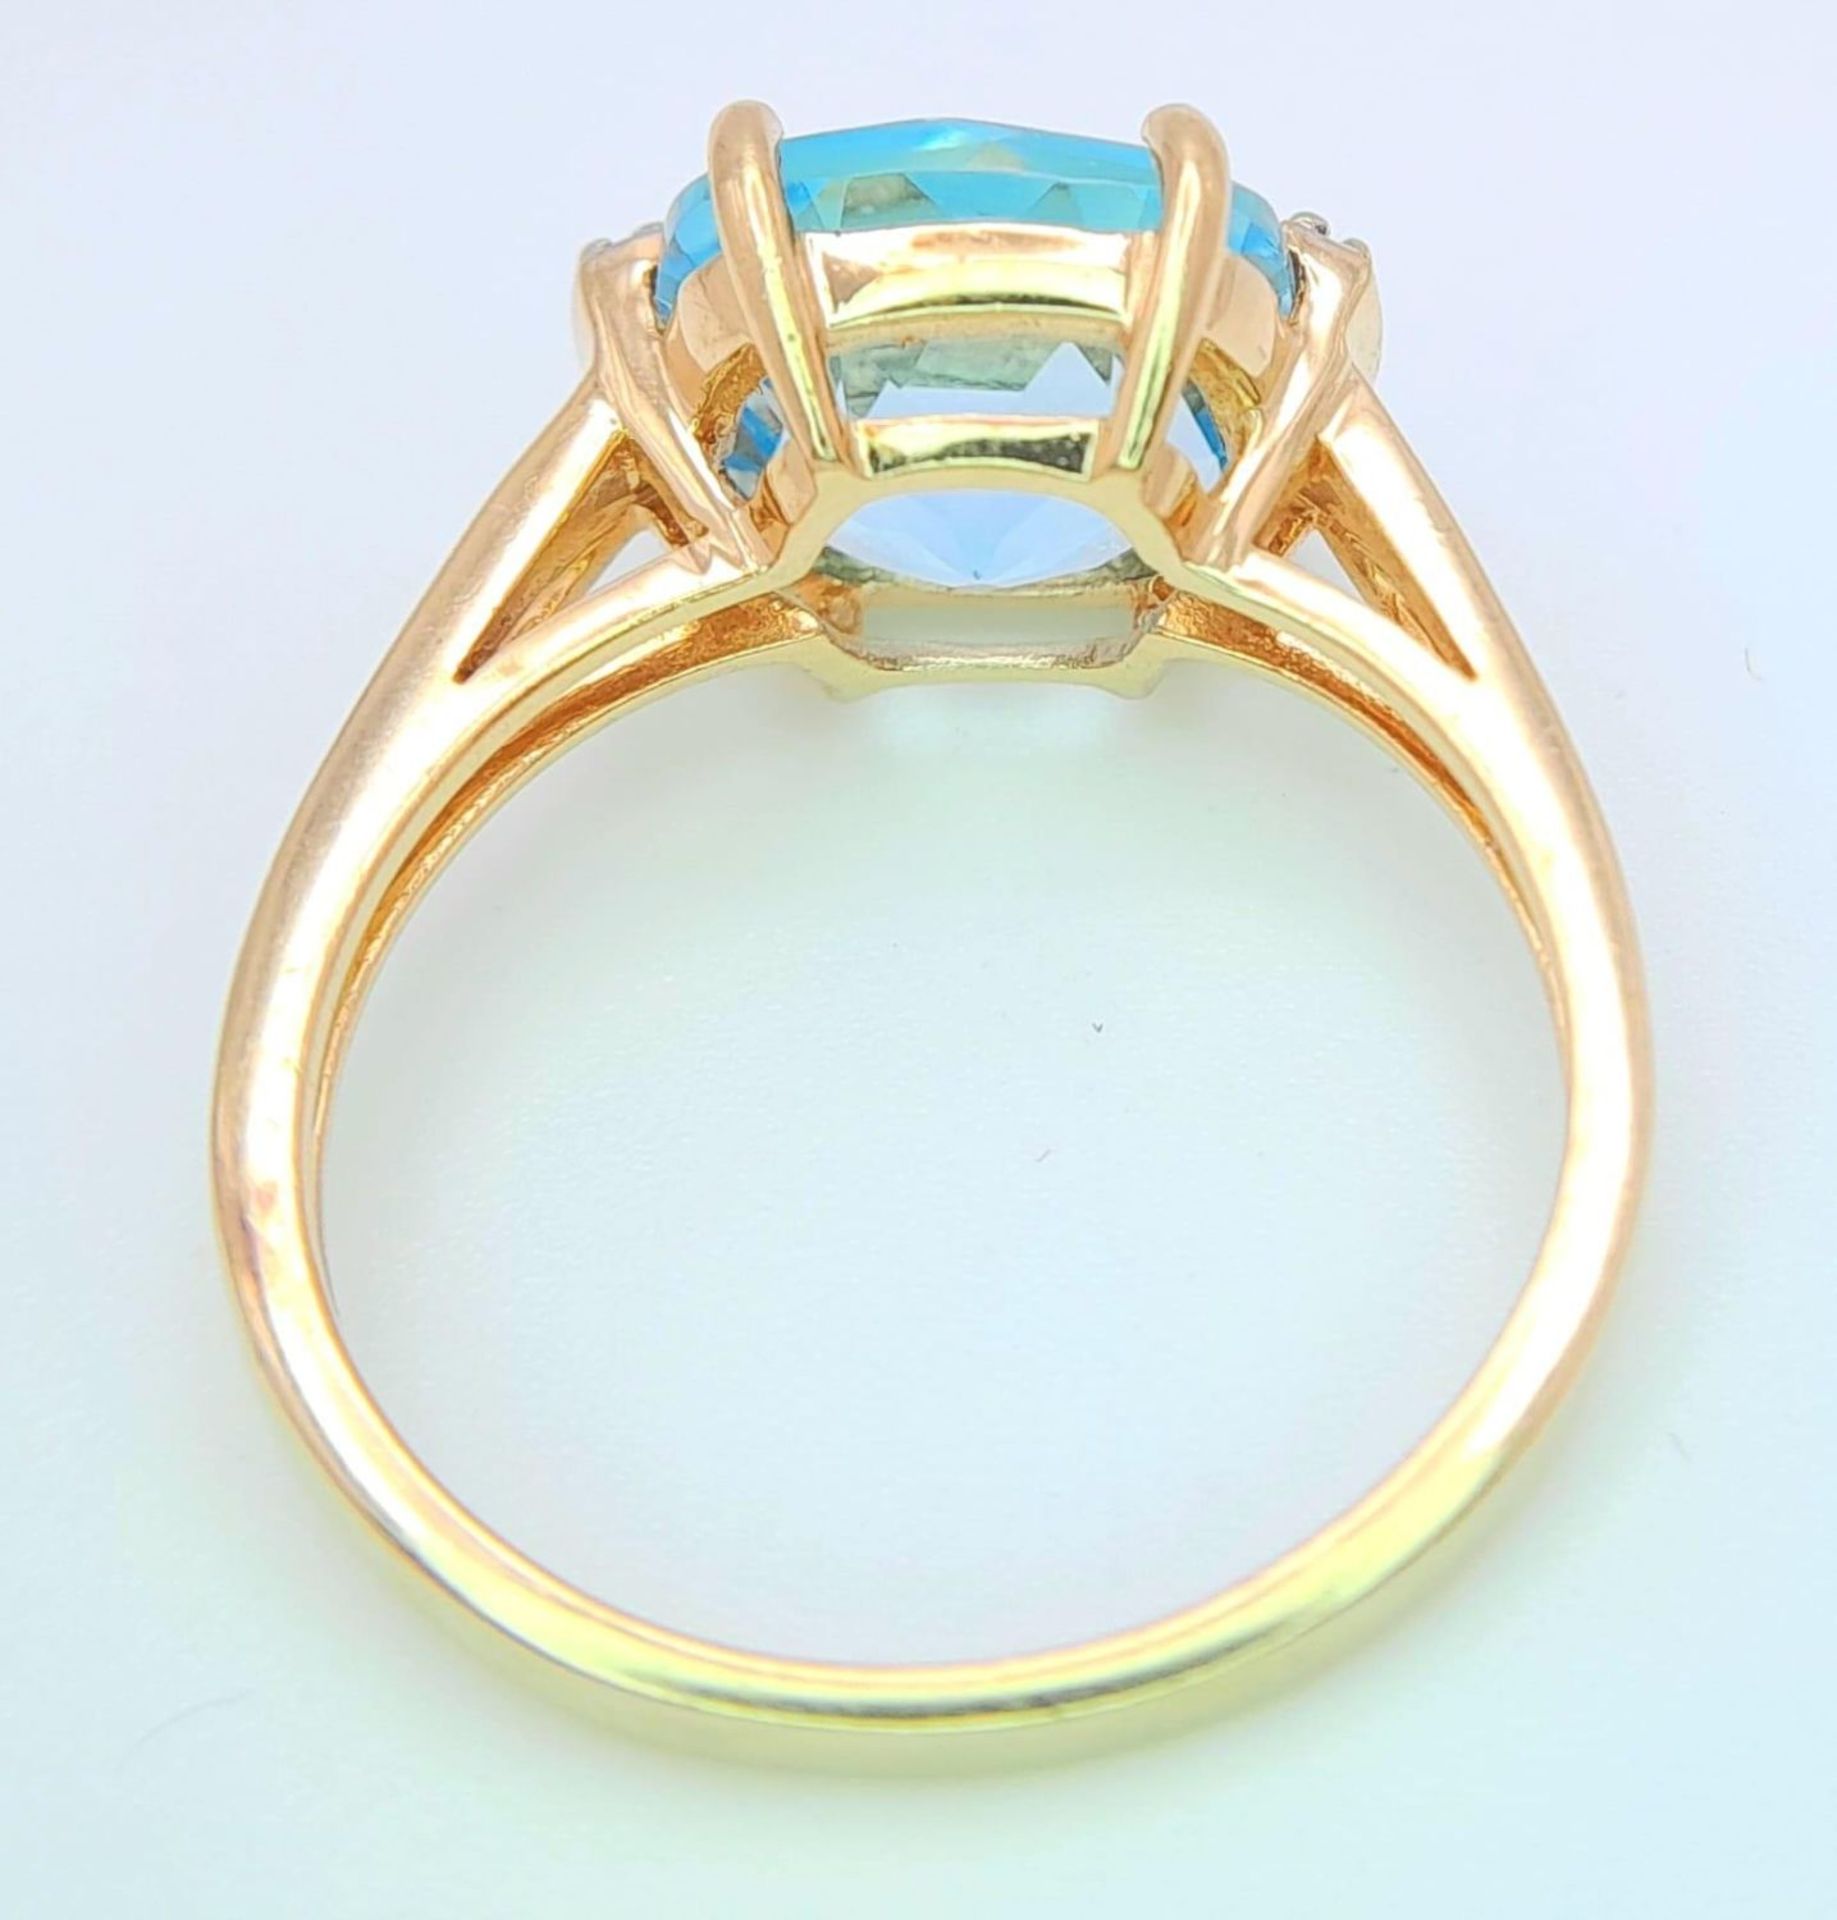 A very attractive 14 K yellow gold ring with a large, cushion cut aquamarine and a pair of - Image 13 of 14